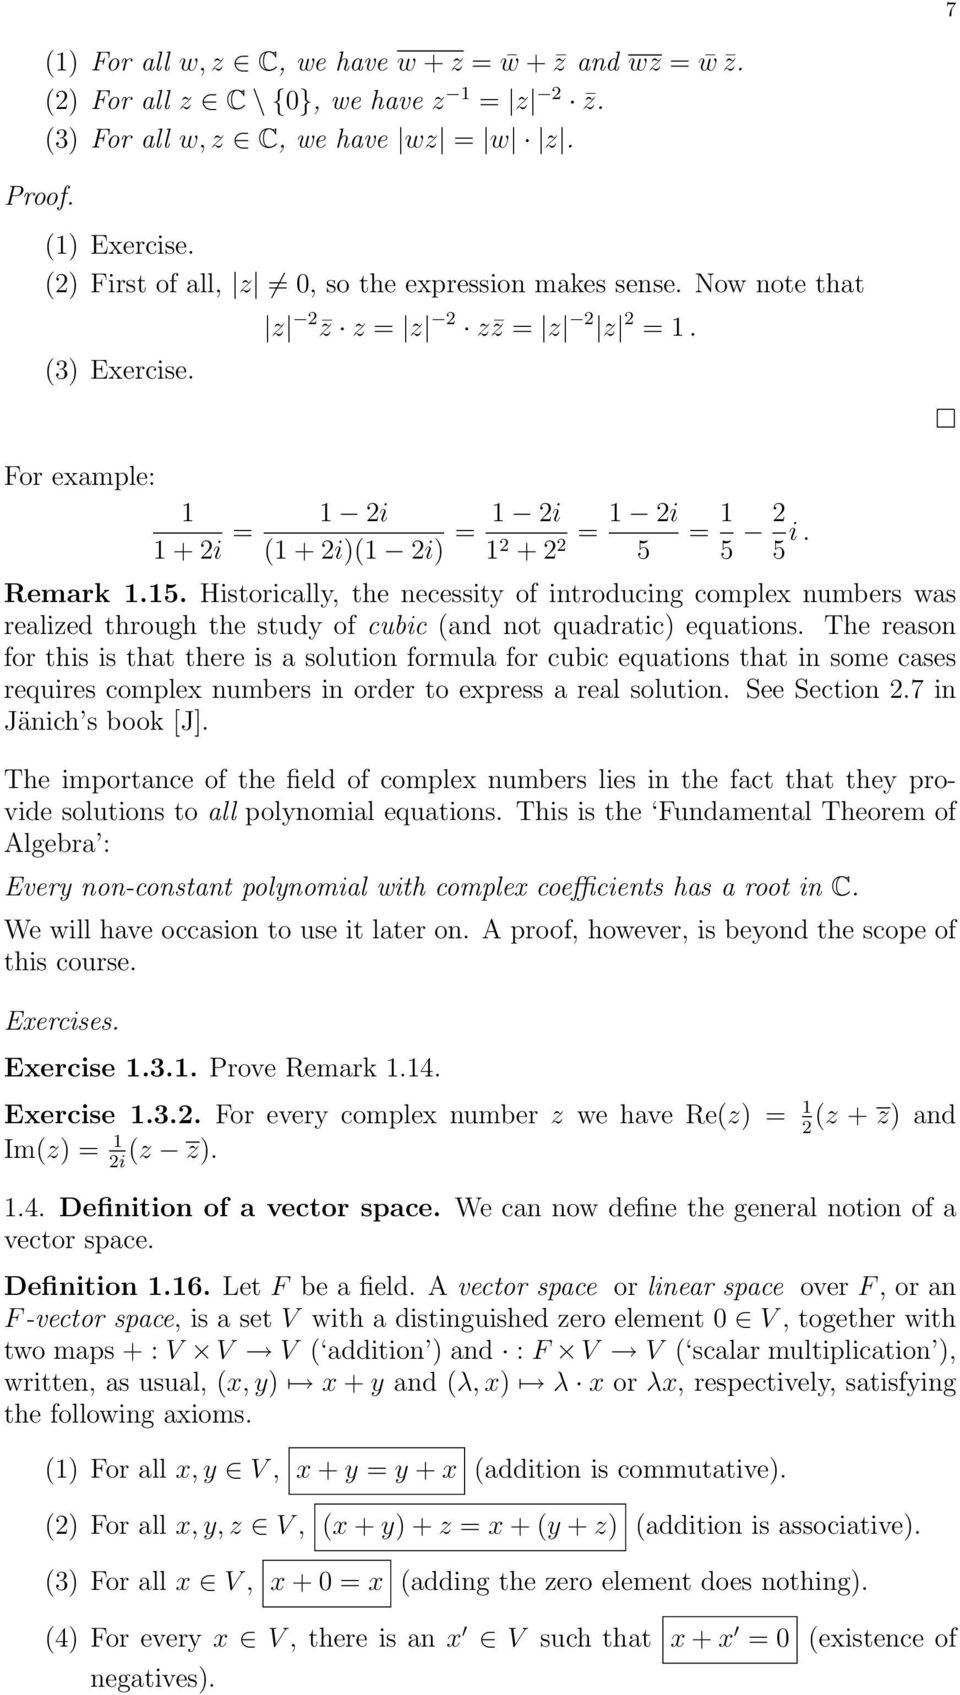 Remark 1.15. Historically, the necessity of introducing complex numbers was realized through the study of cubic (and not quadratic) equations.